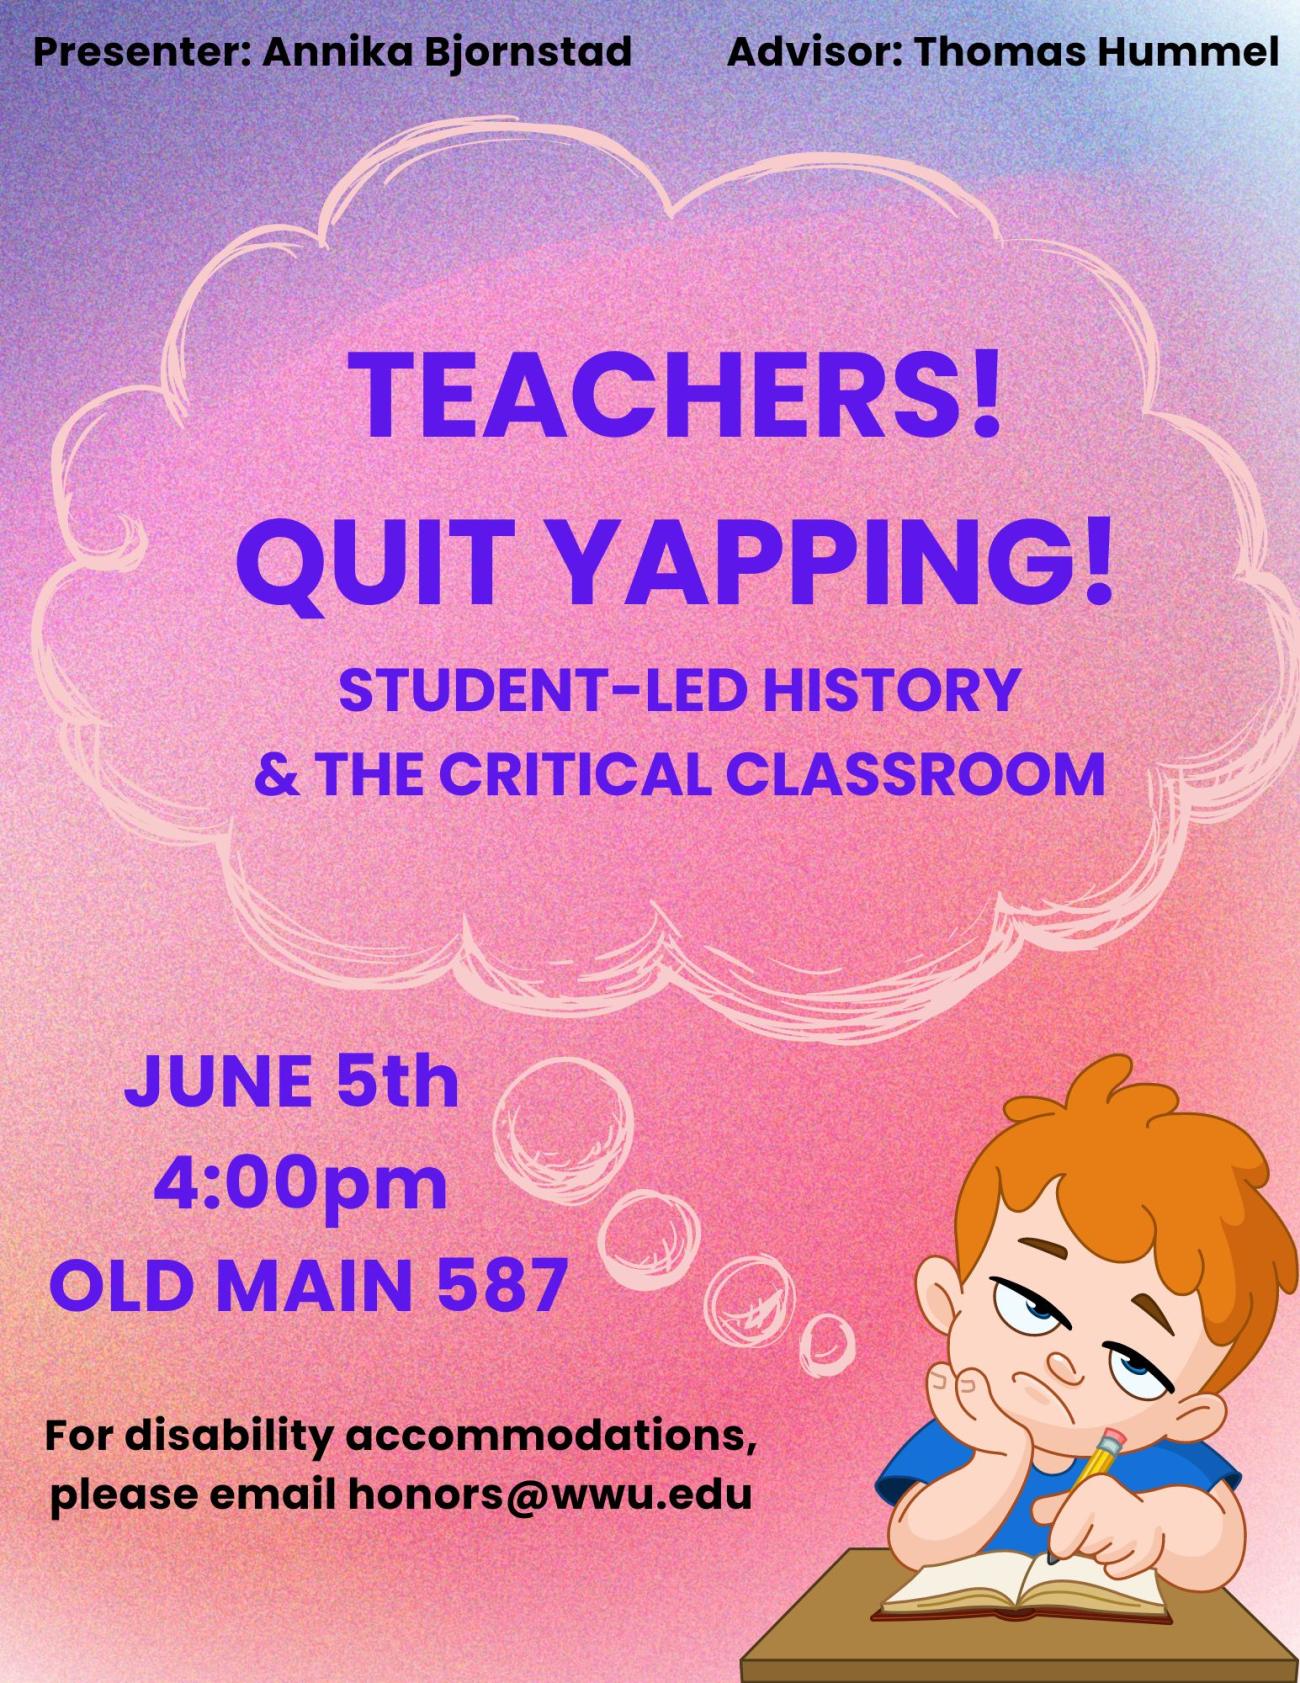 Purple, pink and orange gradient background. Bored student in bottom right corner with a thought bubble that states: Teachers! Quit Yapping! Student-Led History and the Critical Classroom. Top text: Presenter: Annika Bjornstad Advisor Thomas Hummel. Bottom left text: June 5th 4:00 pm, Old Main 587. For disability accommodations please email honors@wwu.edu